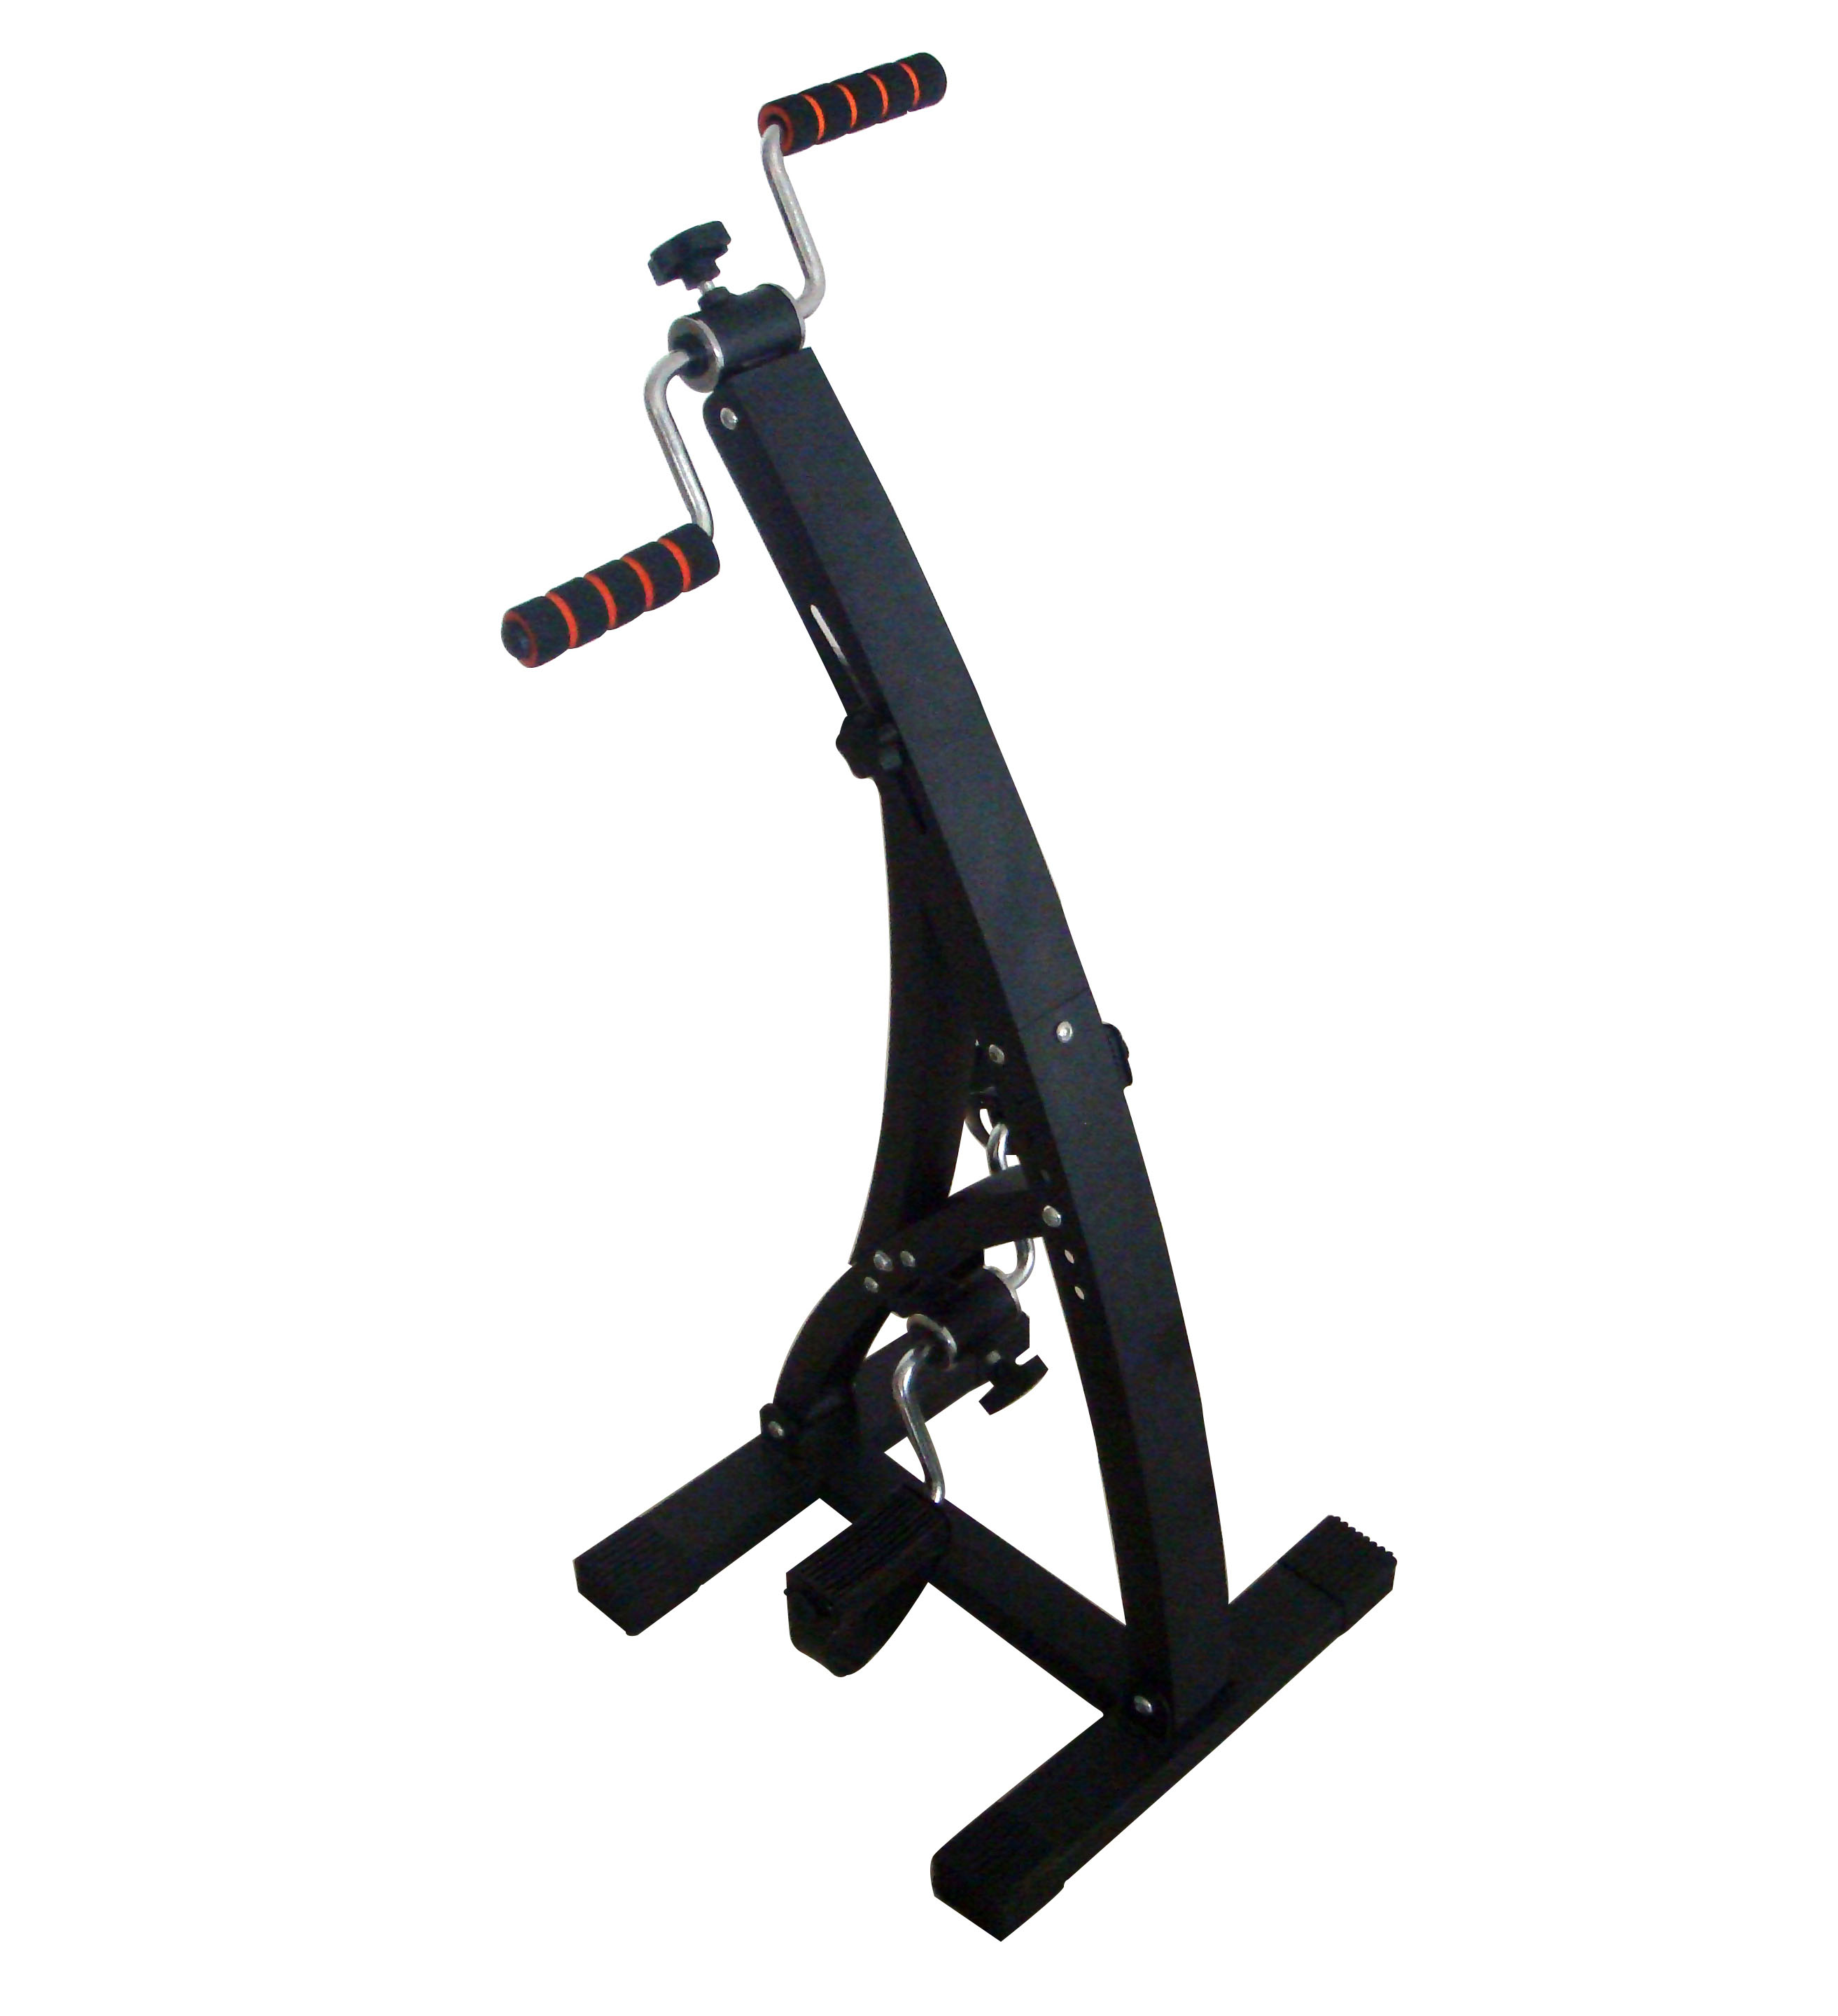 BetaFlex Total-Body Home Physio Exercise Bike Work Out for Arms and Legs at the same time